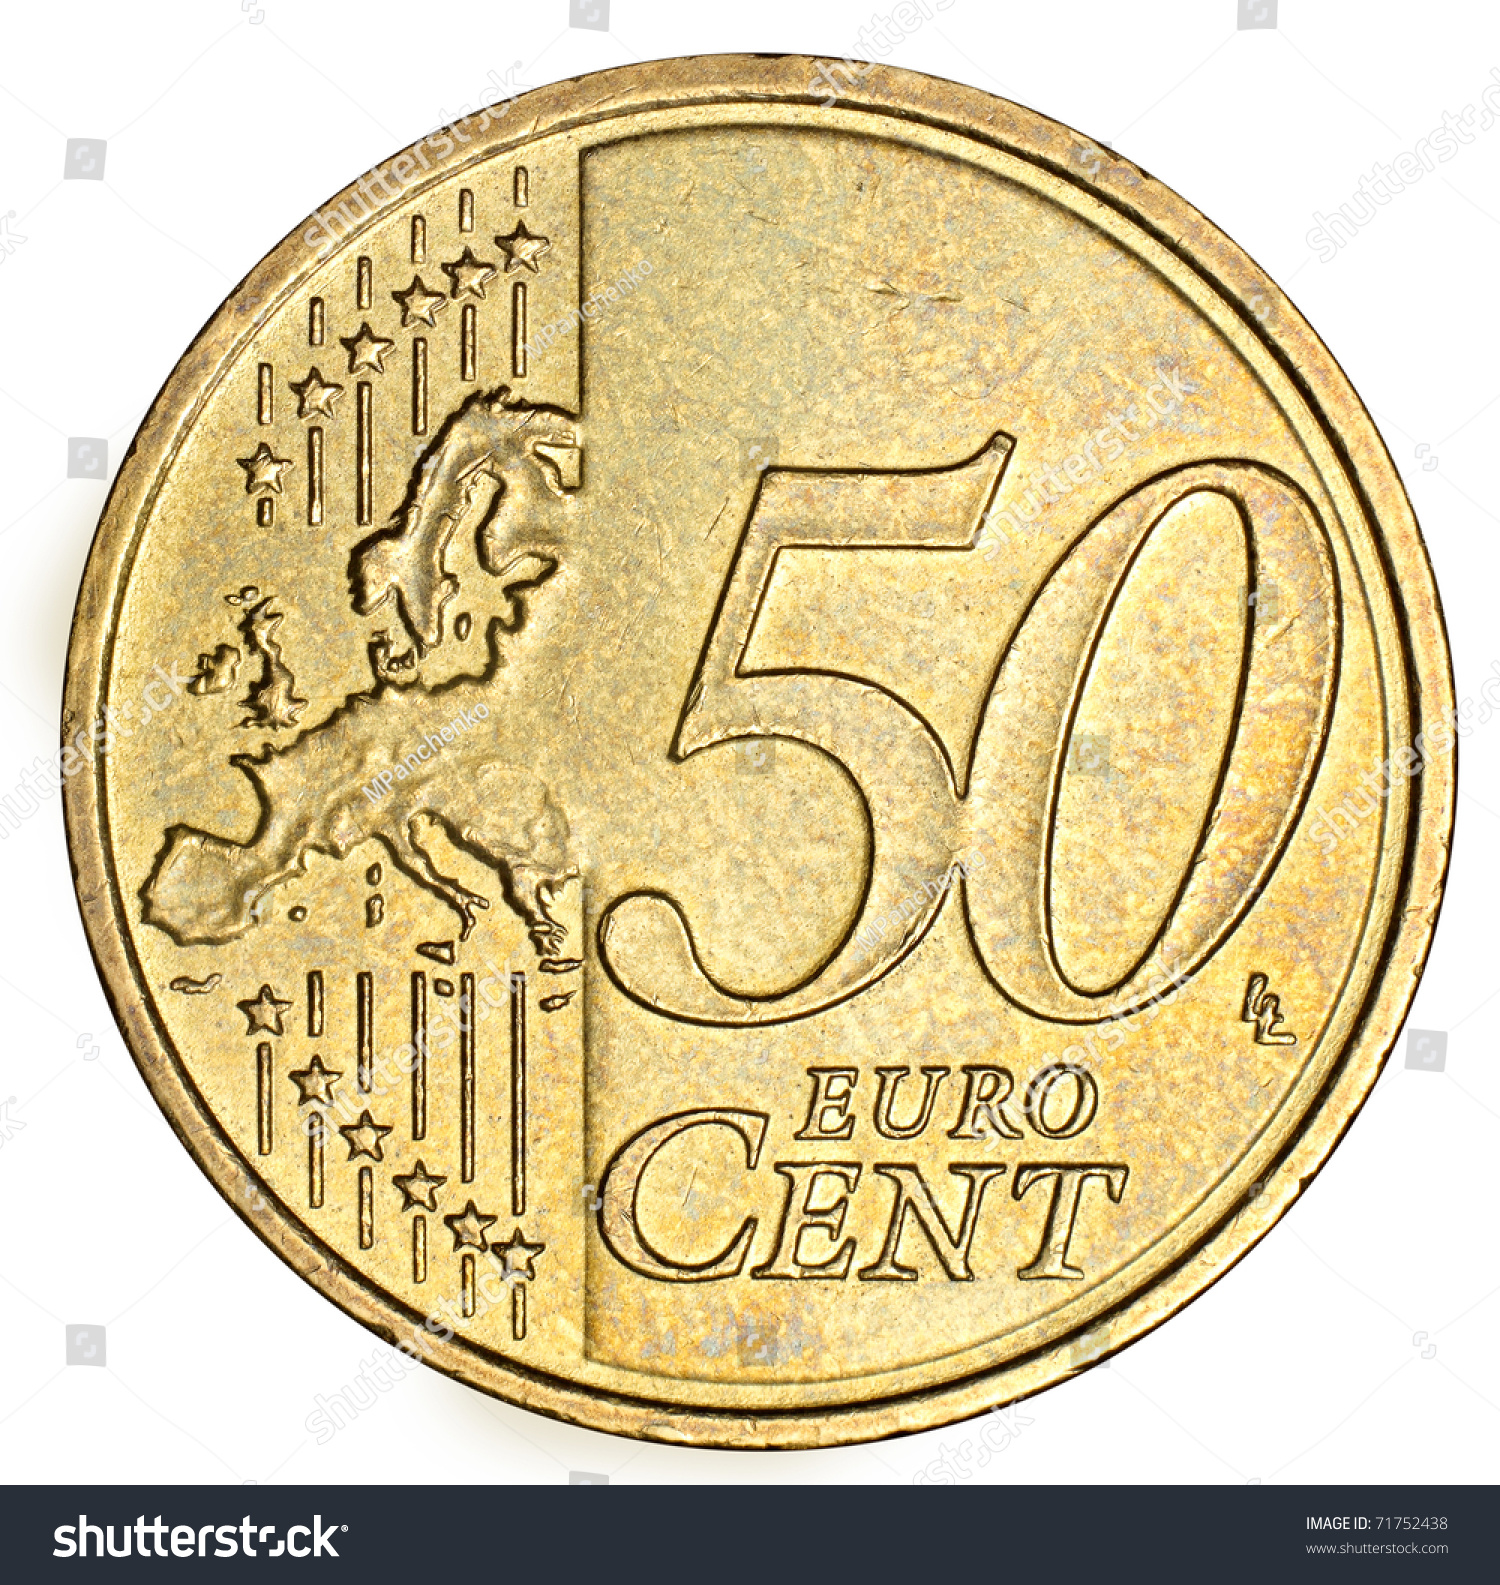 2,144 50 euro cent Stock Photos, Images & Photography | Shutterstock